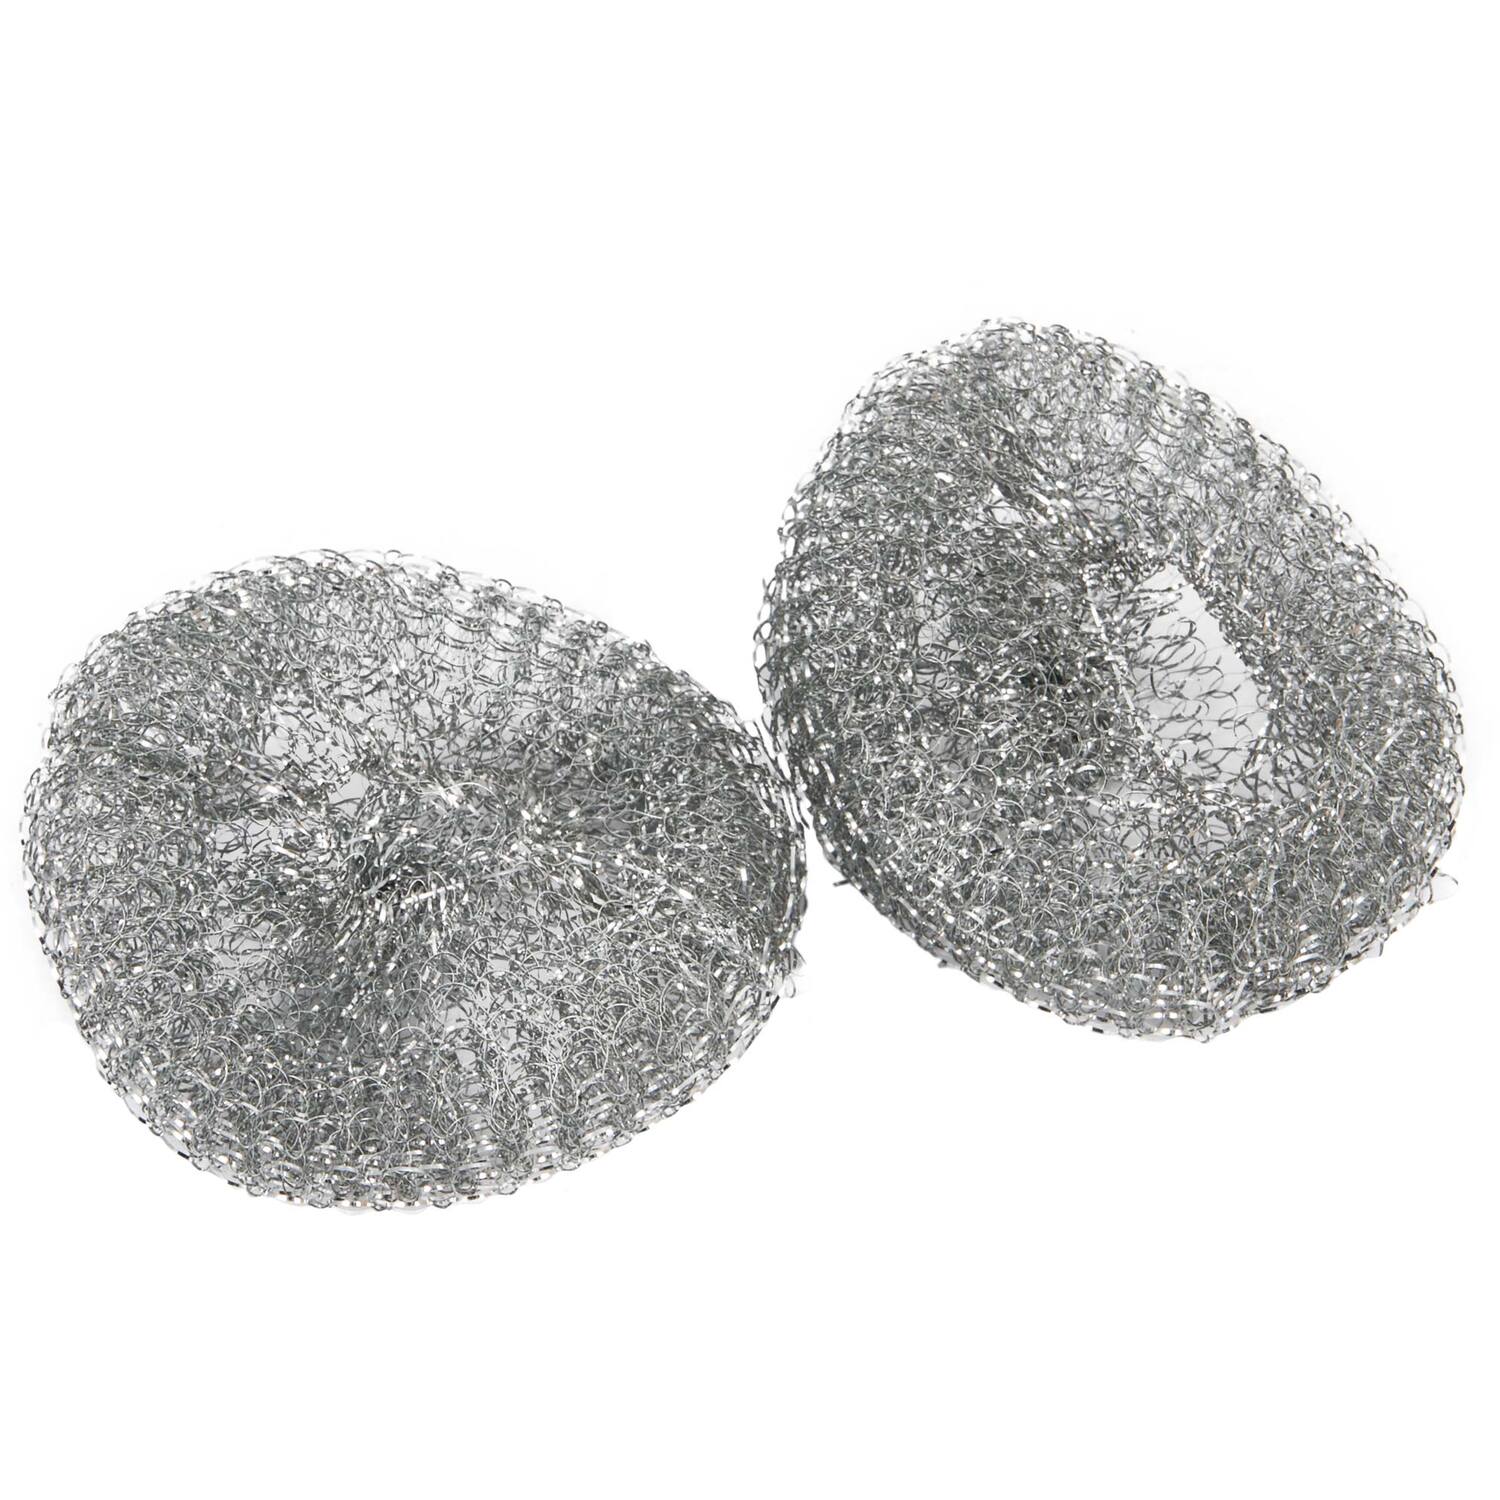 Pack of 5 Zinc Coated Dish Scourers Image 1